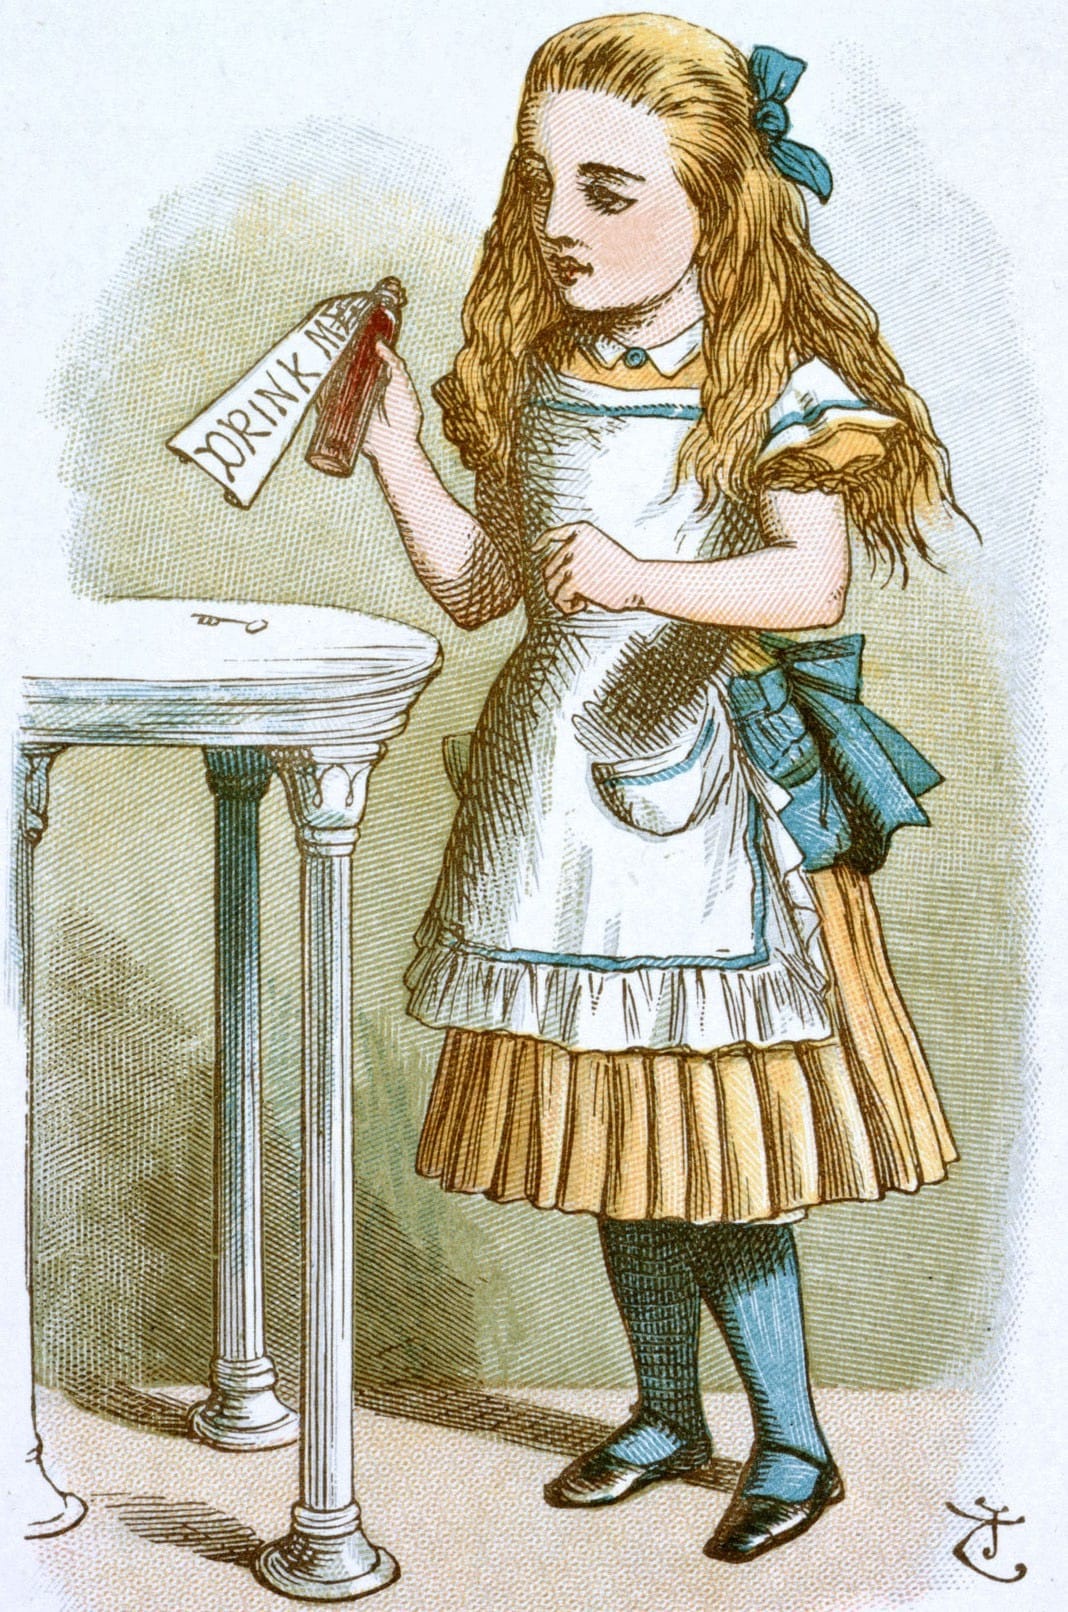 Lewis Carroll, author of Alice in Wonderland, is also a mathematician. He invented many attractive products, although some of them did not work as expected. All illustrations are provided by John Tenniel.